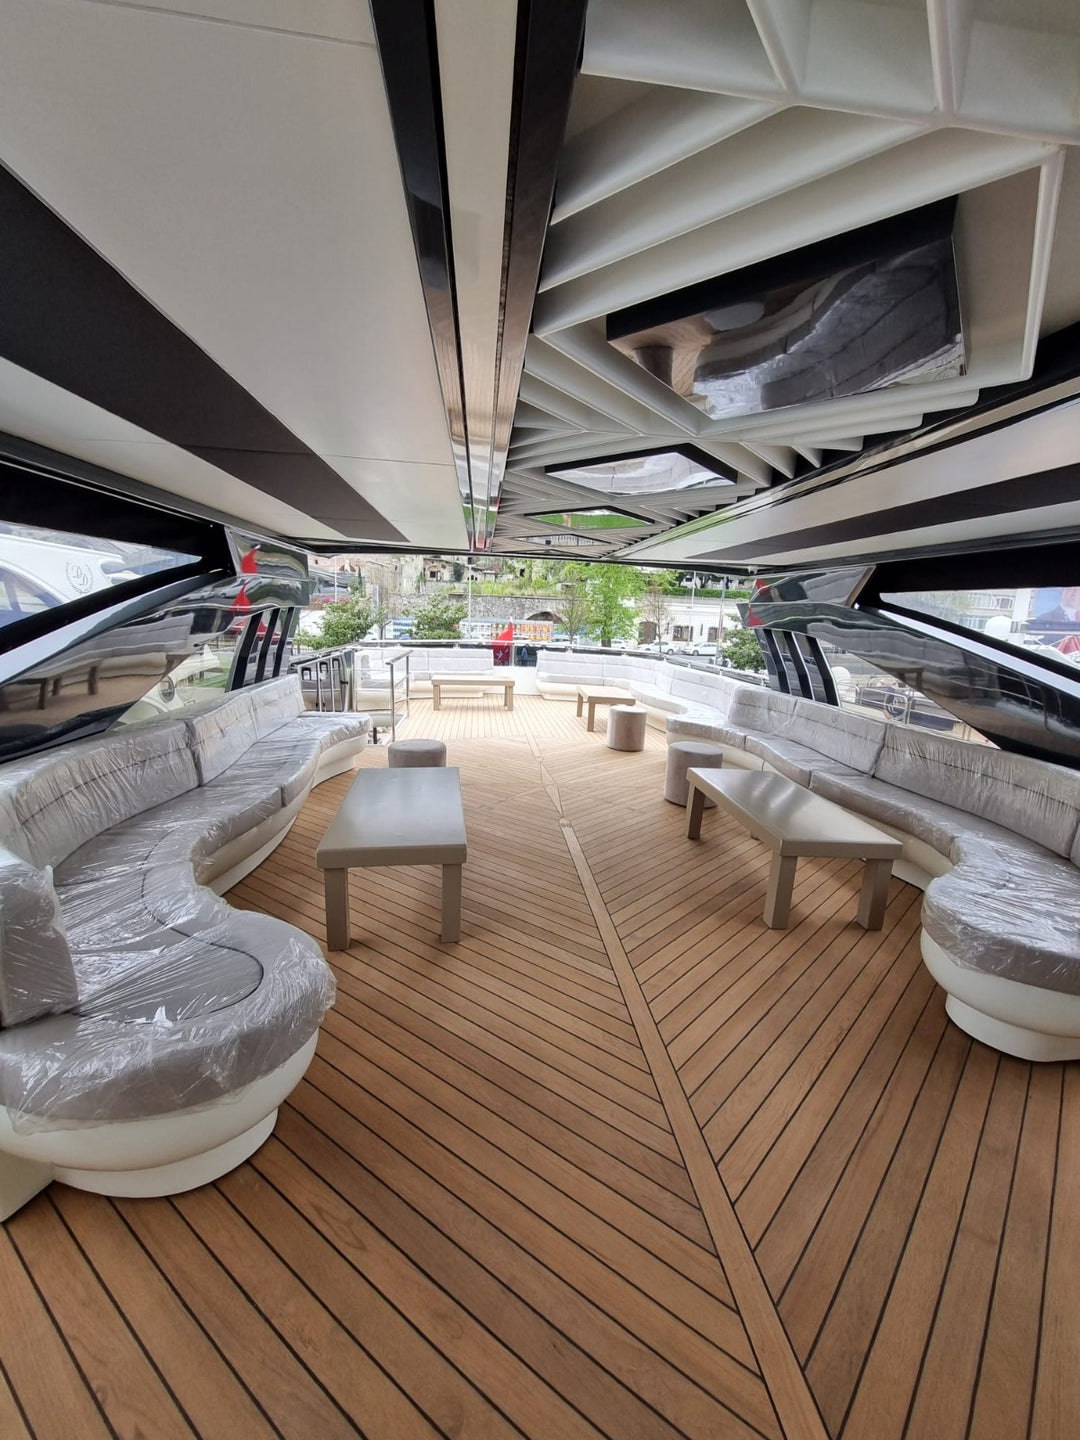 Plush seating for 8-12 guests on a luxury yacht, ready for an elegant escape in Istanbul.